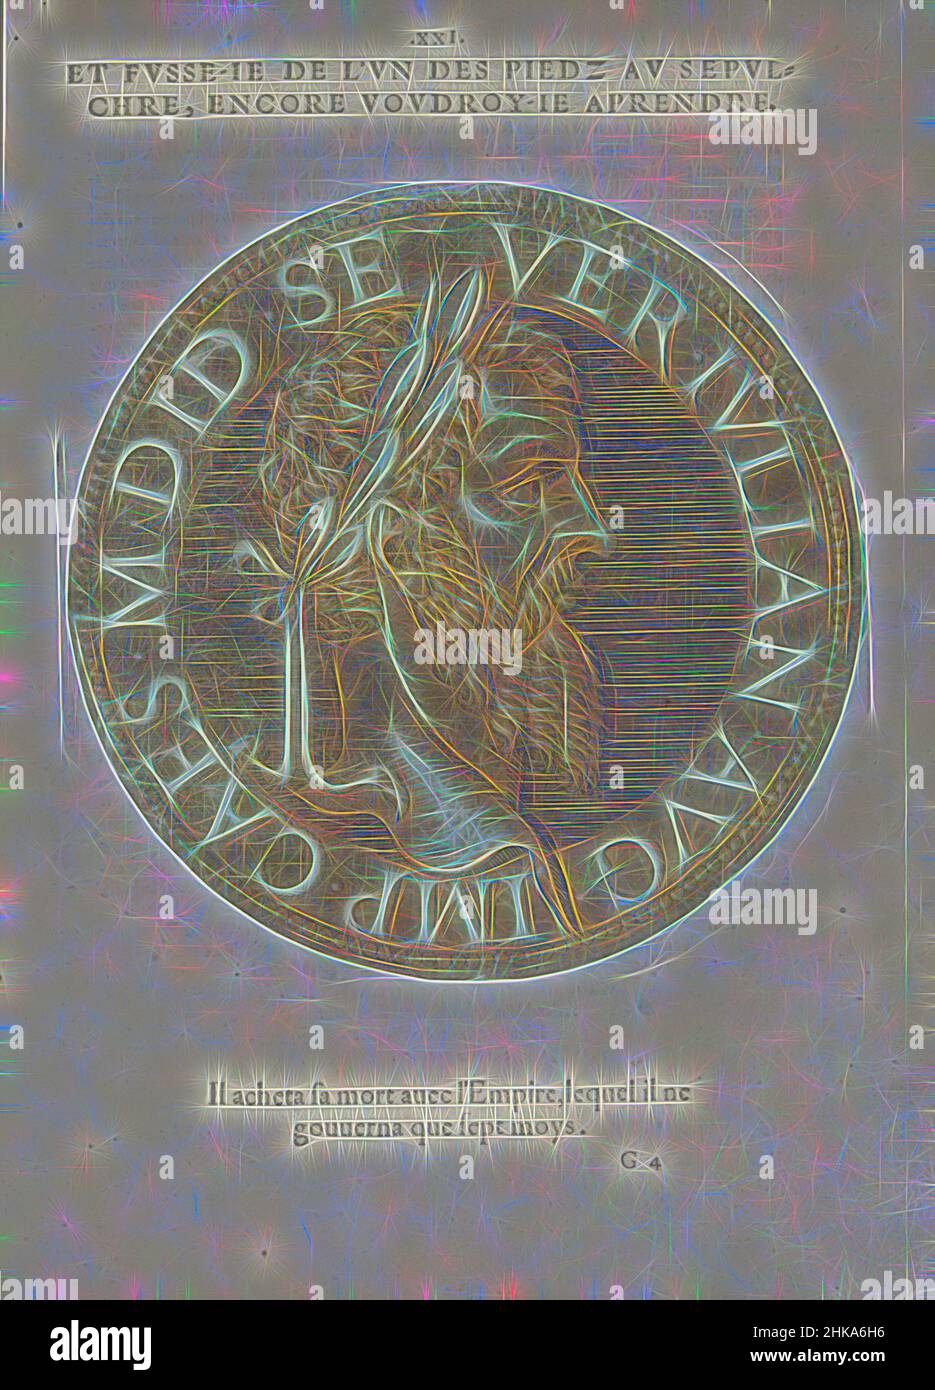 Inspired by Portrait of Emperor Didius Julianus, Les images presque de tous les empereurs, Portrait of Emperor Didius Julianus, on a coin with edge lettering. The print is part of a book on the emperors from Julius Caesar to Charles V and his brother Ferdinand., Joos Gietleughen, print maker: Hubert, Reimagined by Artotop. Classic art reinvented with a modern twist. Design of warm cheerful glowing of brightness and light ray radiance. Photography inspired by surrealism and futurism, embracing dynamic energy of modern technology, movement, speed and revolutionize culture Stock Photo